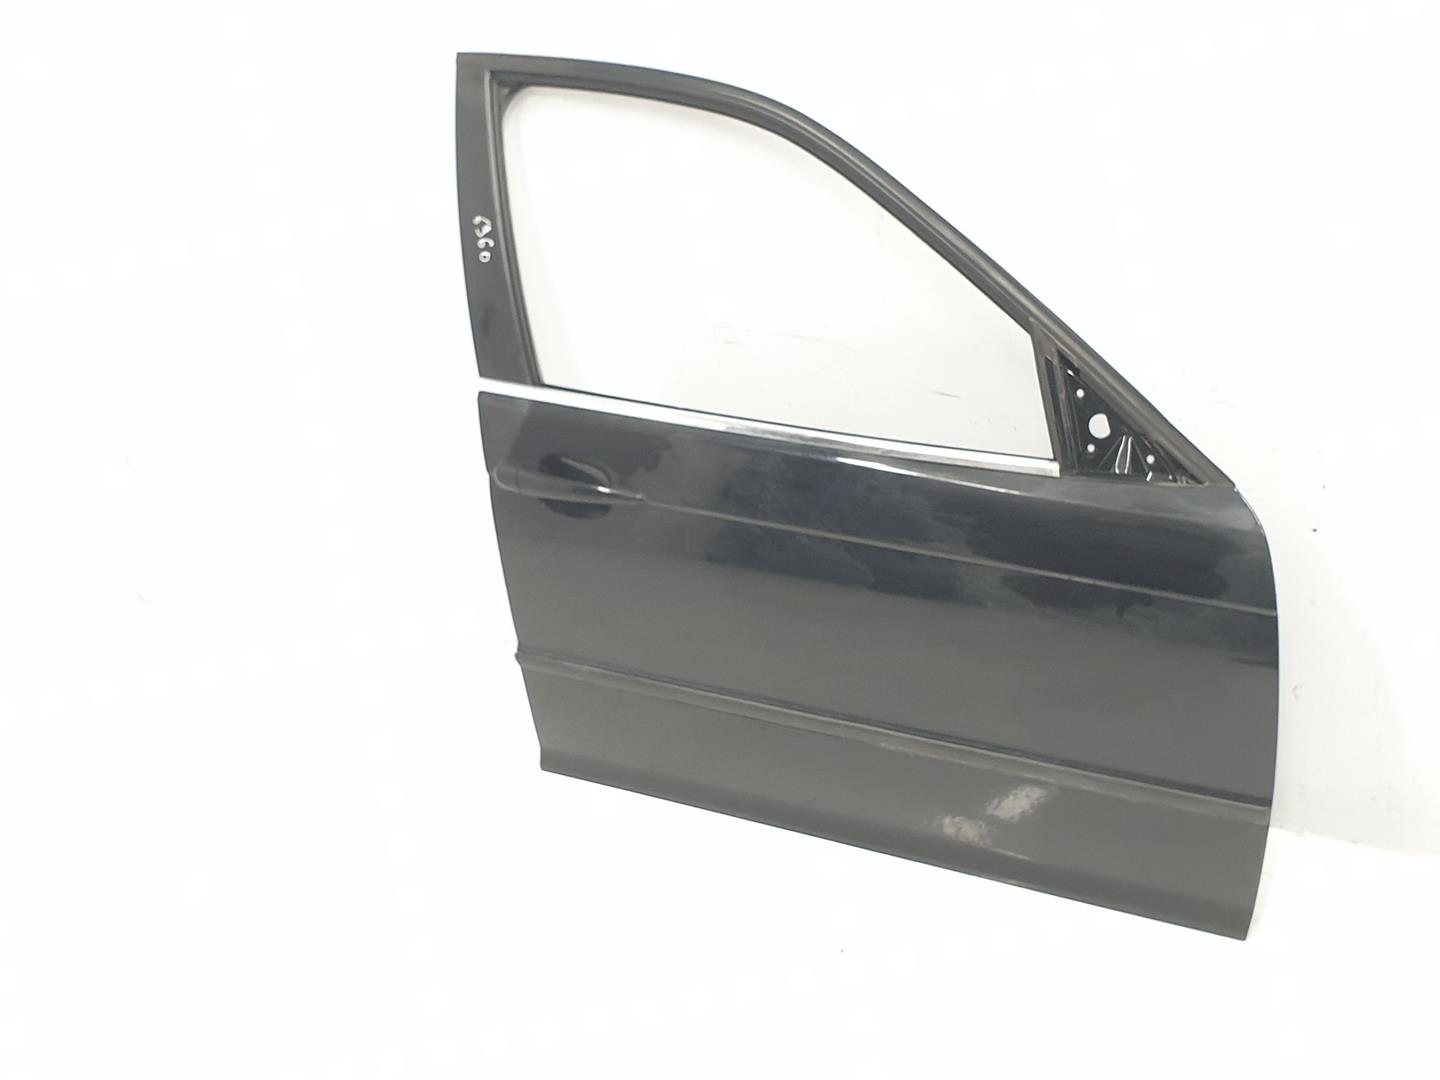 BMW 3 Series E46 (1997-2006) Front Right Door 7034152, 41517034152, COLORNEGRO(475) 24551594